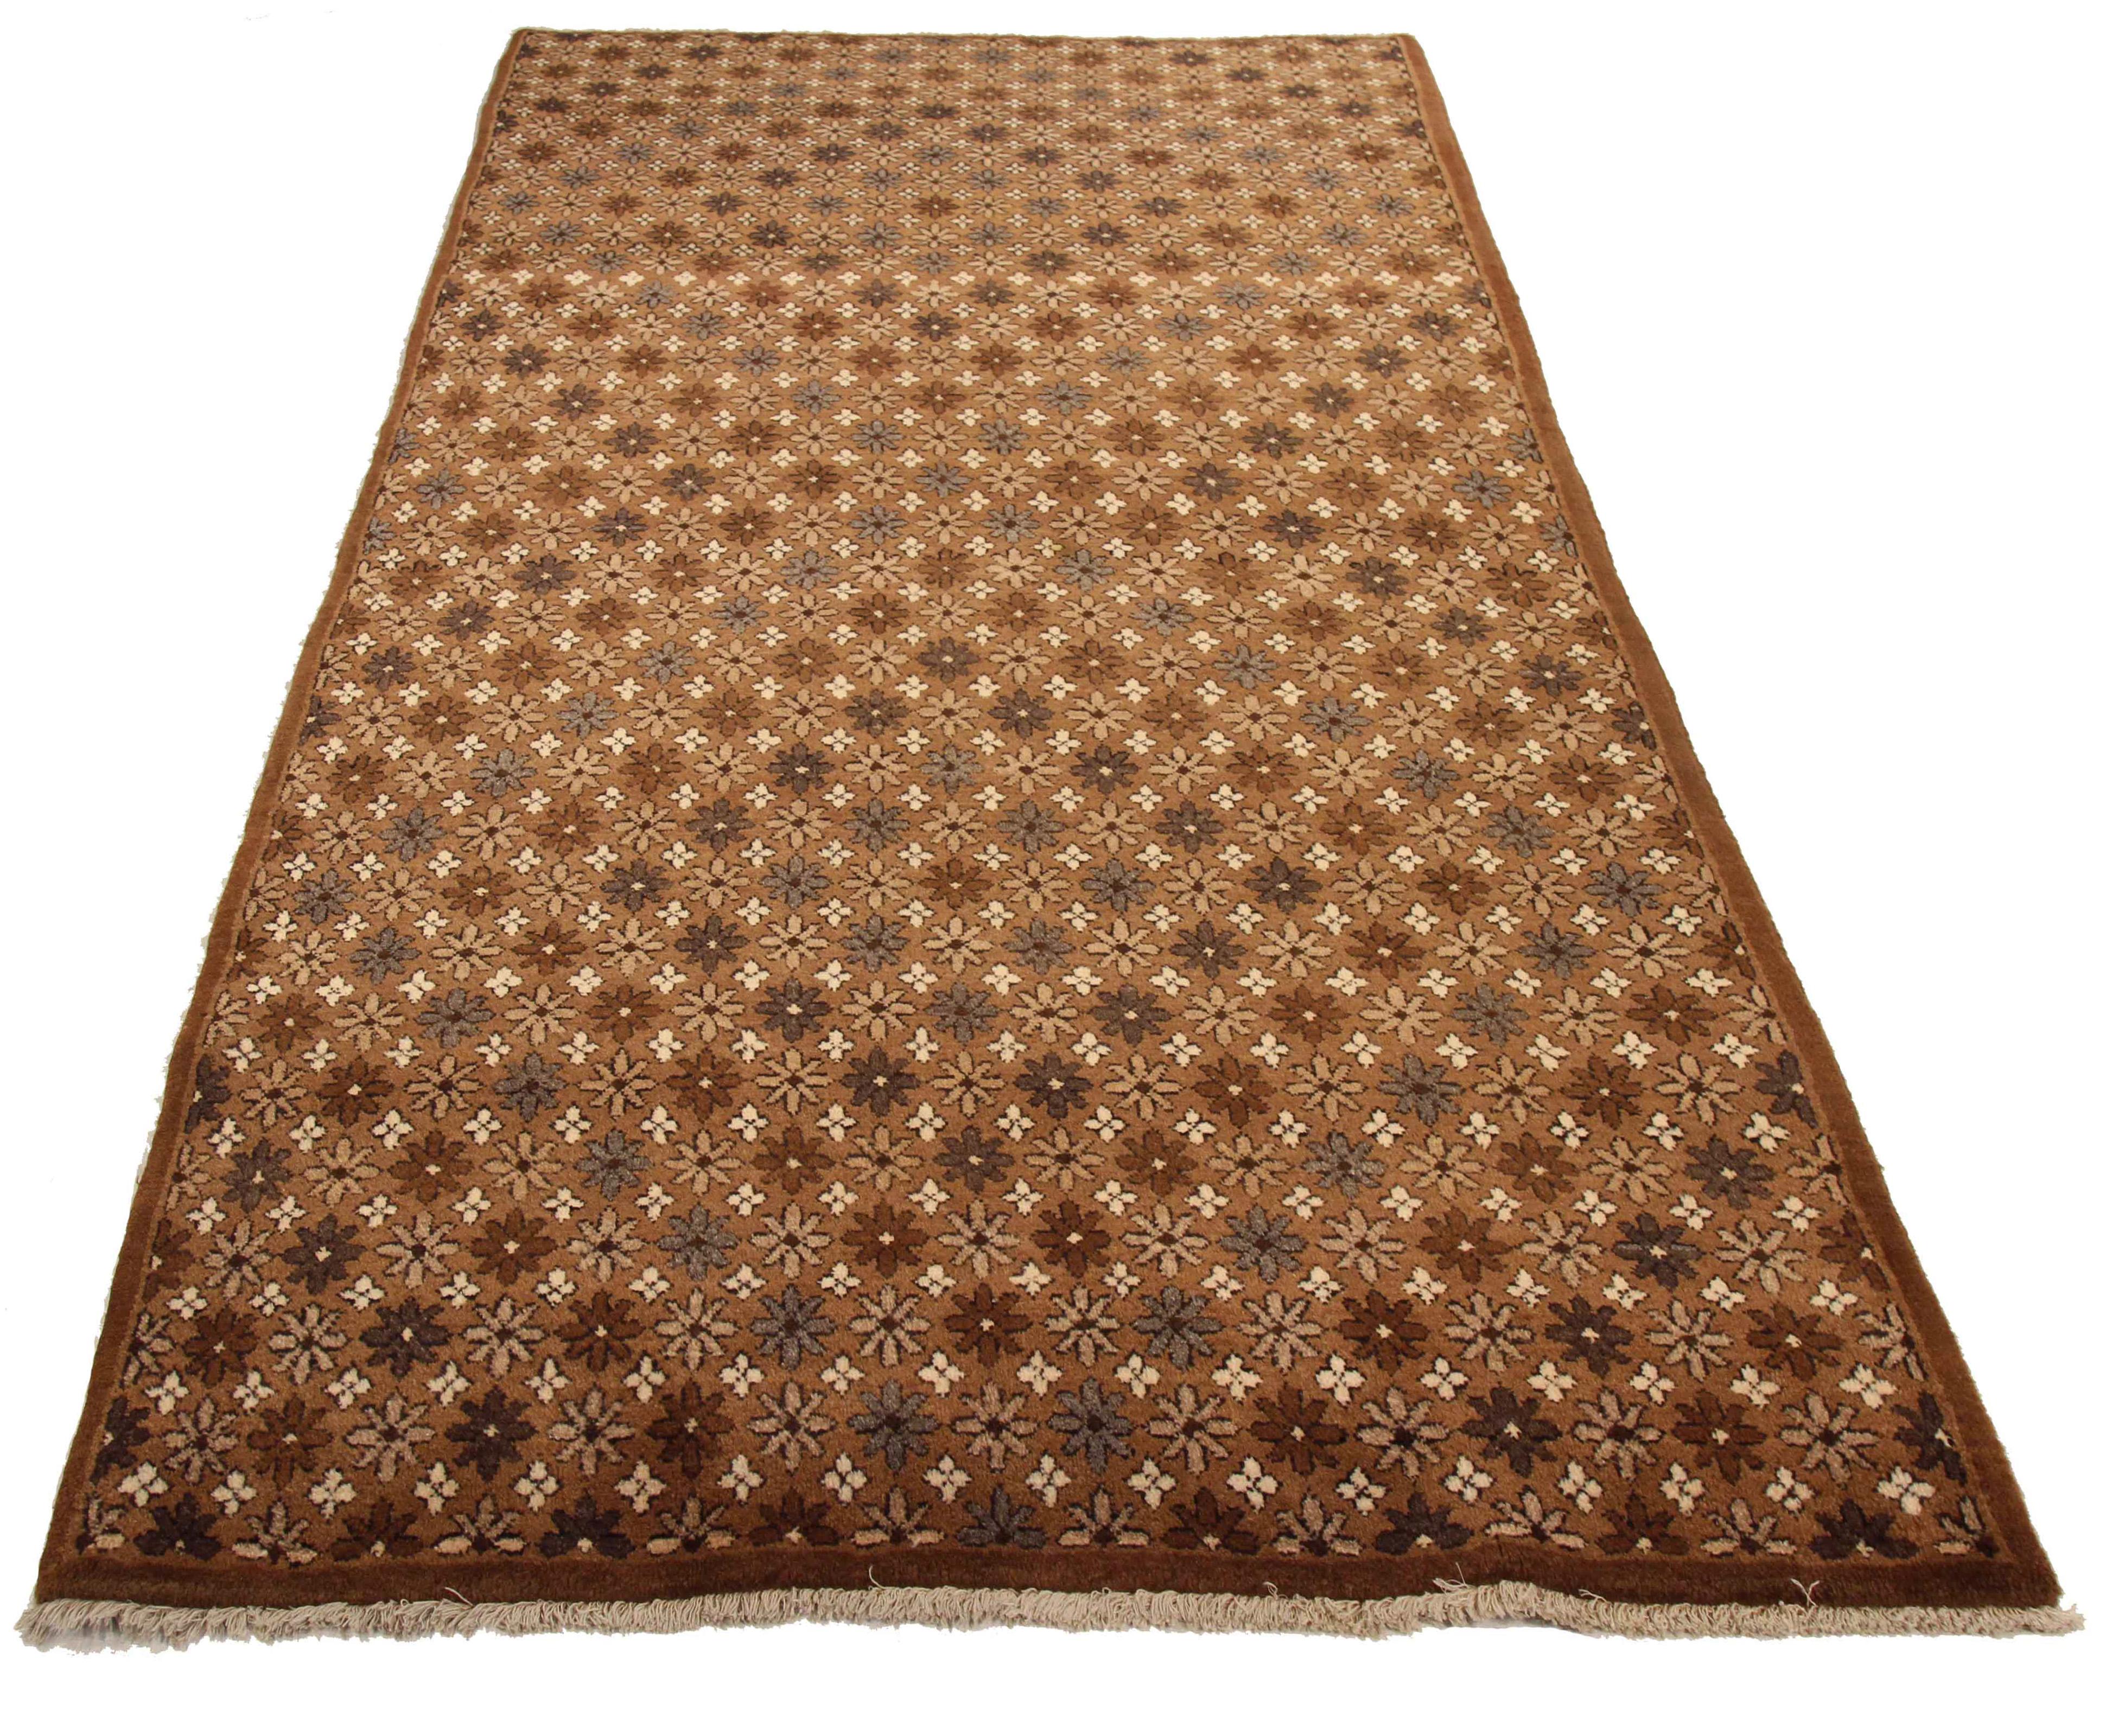 Antique Persian area rug handwoven from the finest sheep’s wool. It’s colored with all-natural vegetable dyes that are safe for humans and pets. It’s a traditional Kurdish design handwoven by expert artisans. It’s a lovely area rug that can be